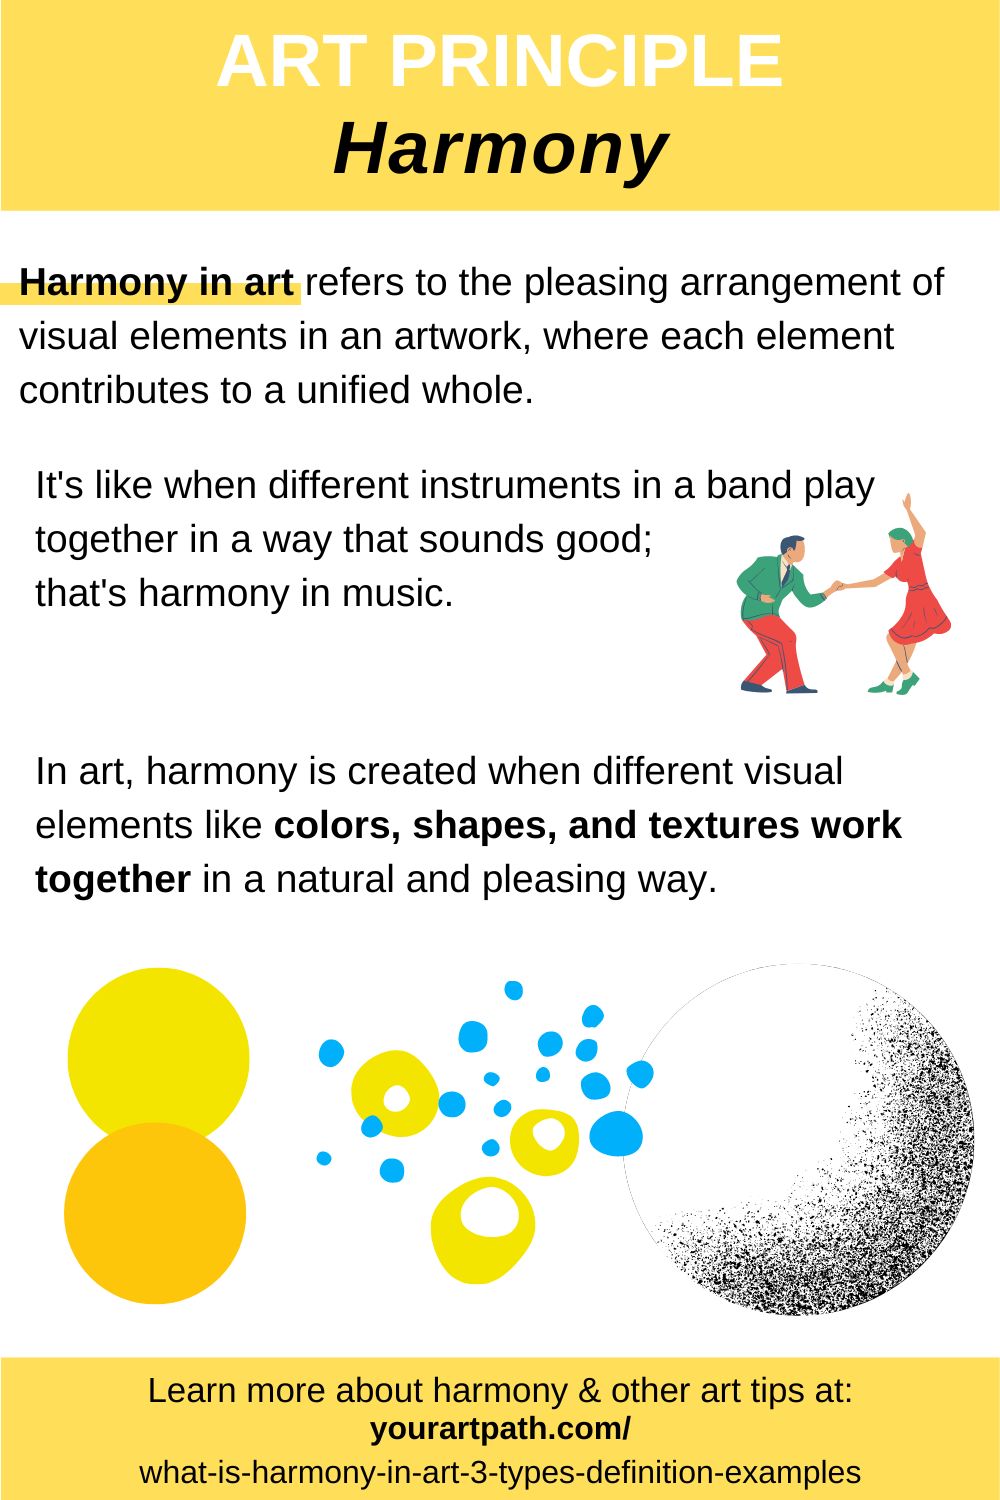 What is Harmony in Art?

Harmony in art refers to the pleasing arrangement of visual elements in an artwork, where each element contributes to a unified whole. It is the visually satisfying effect produced when similar or related elements within the composition are combined to achieve unity.